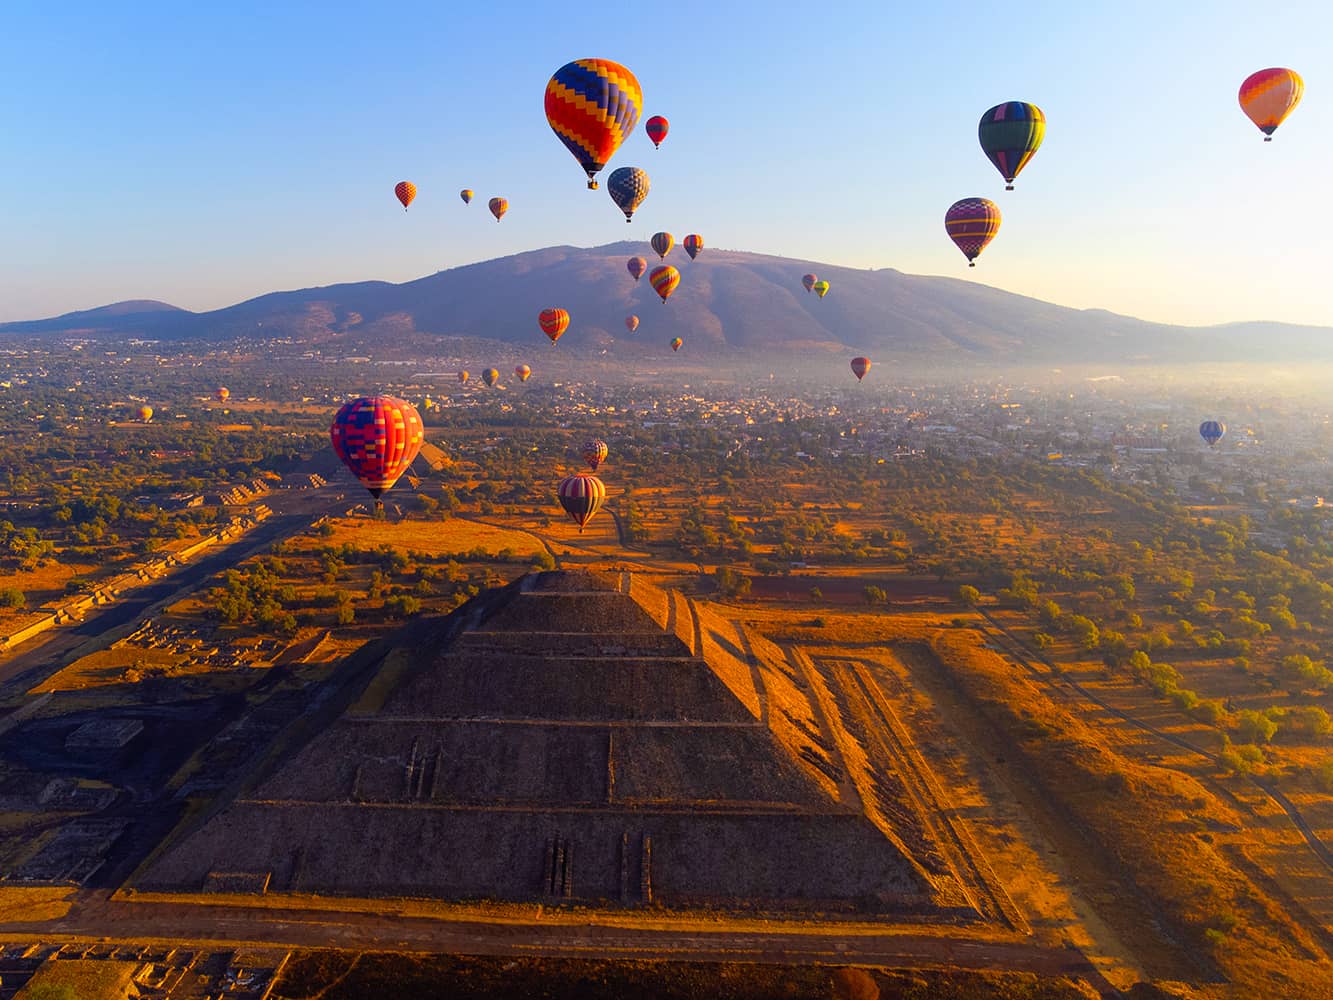  Admire the Teotihuacan Pyramids on a sunrise hot air balloon ride  